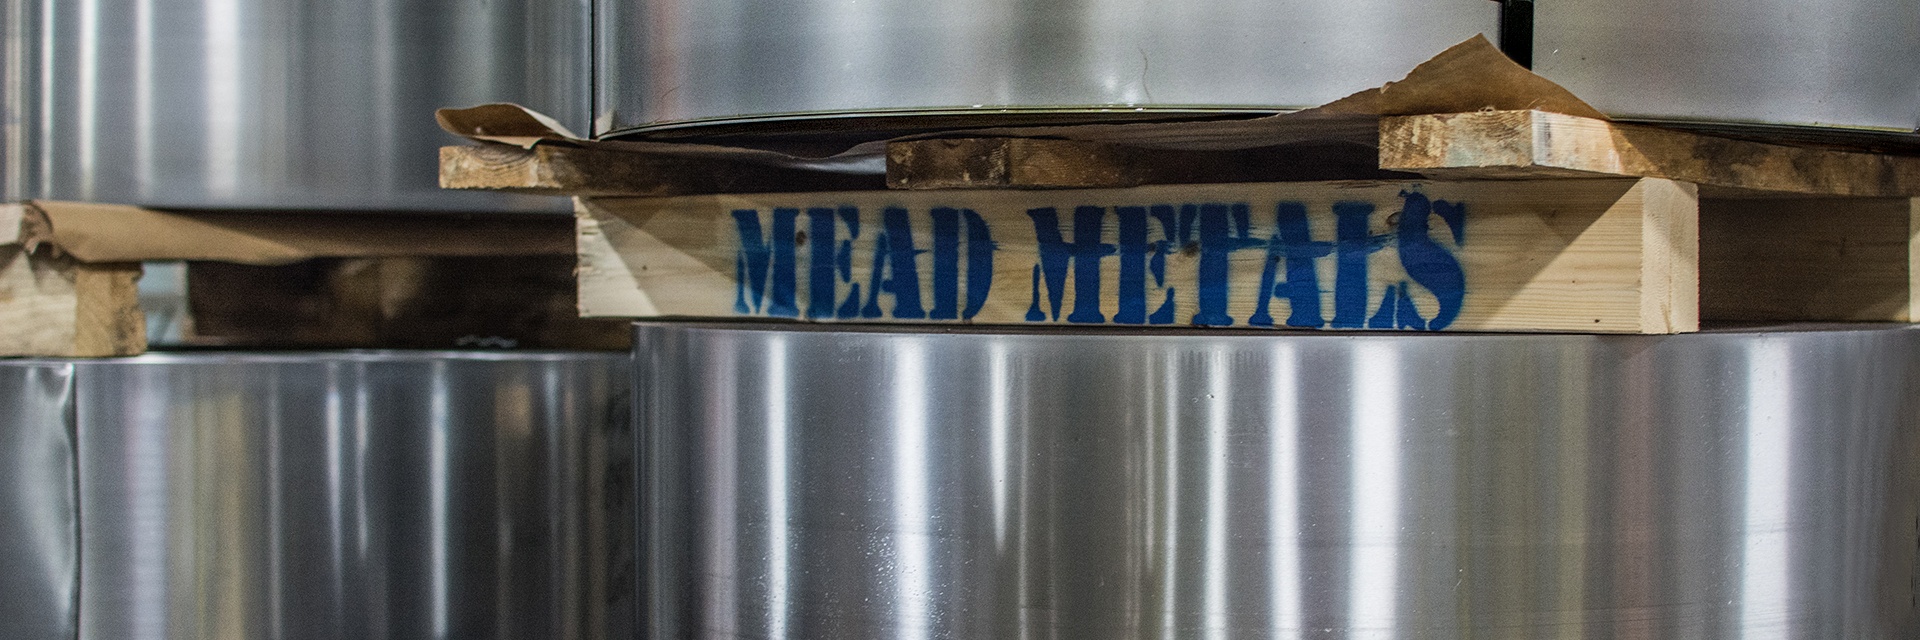 Stainless steel with wood Mead Metals sign in the middle